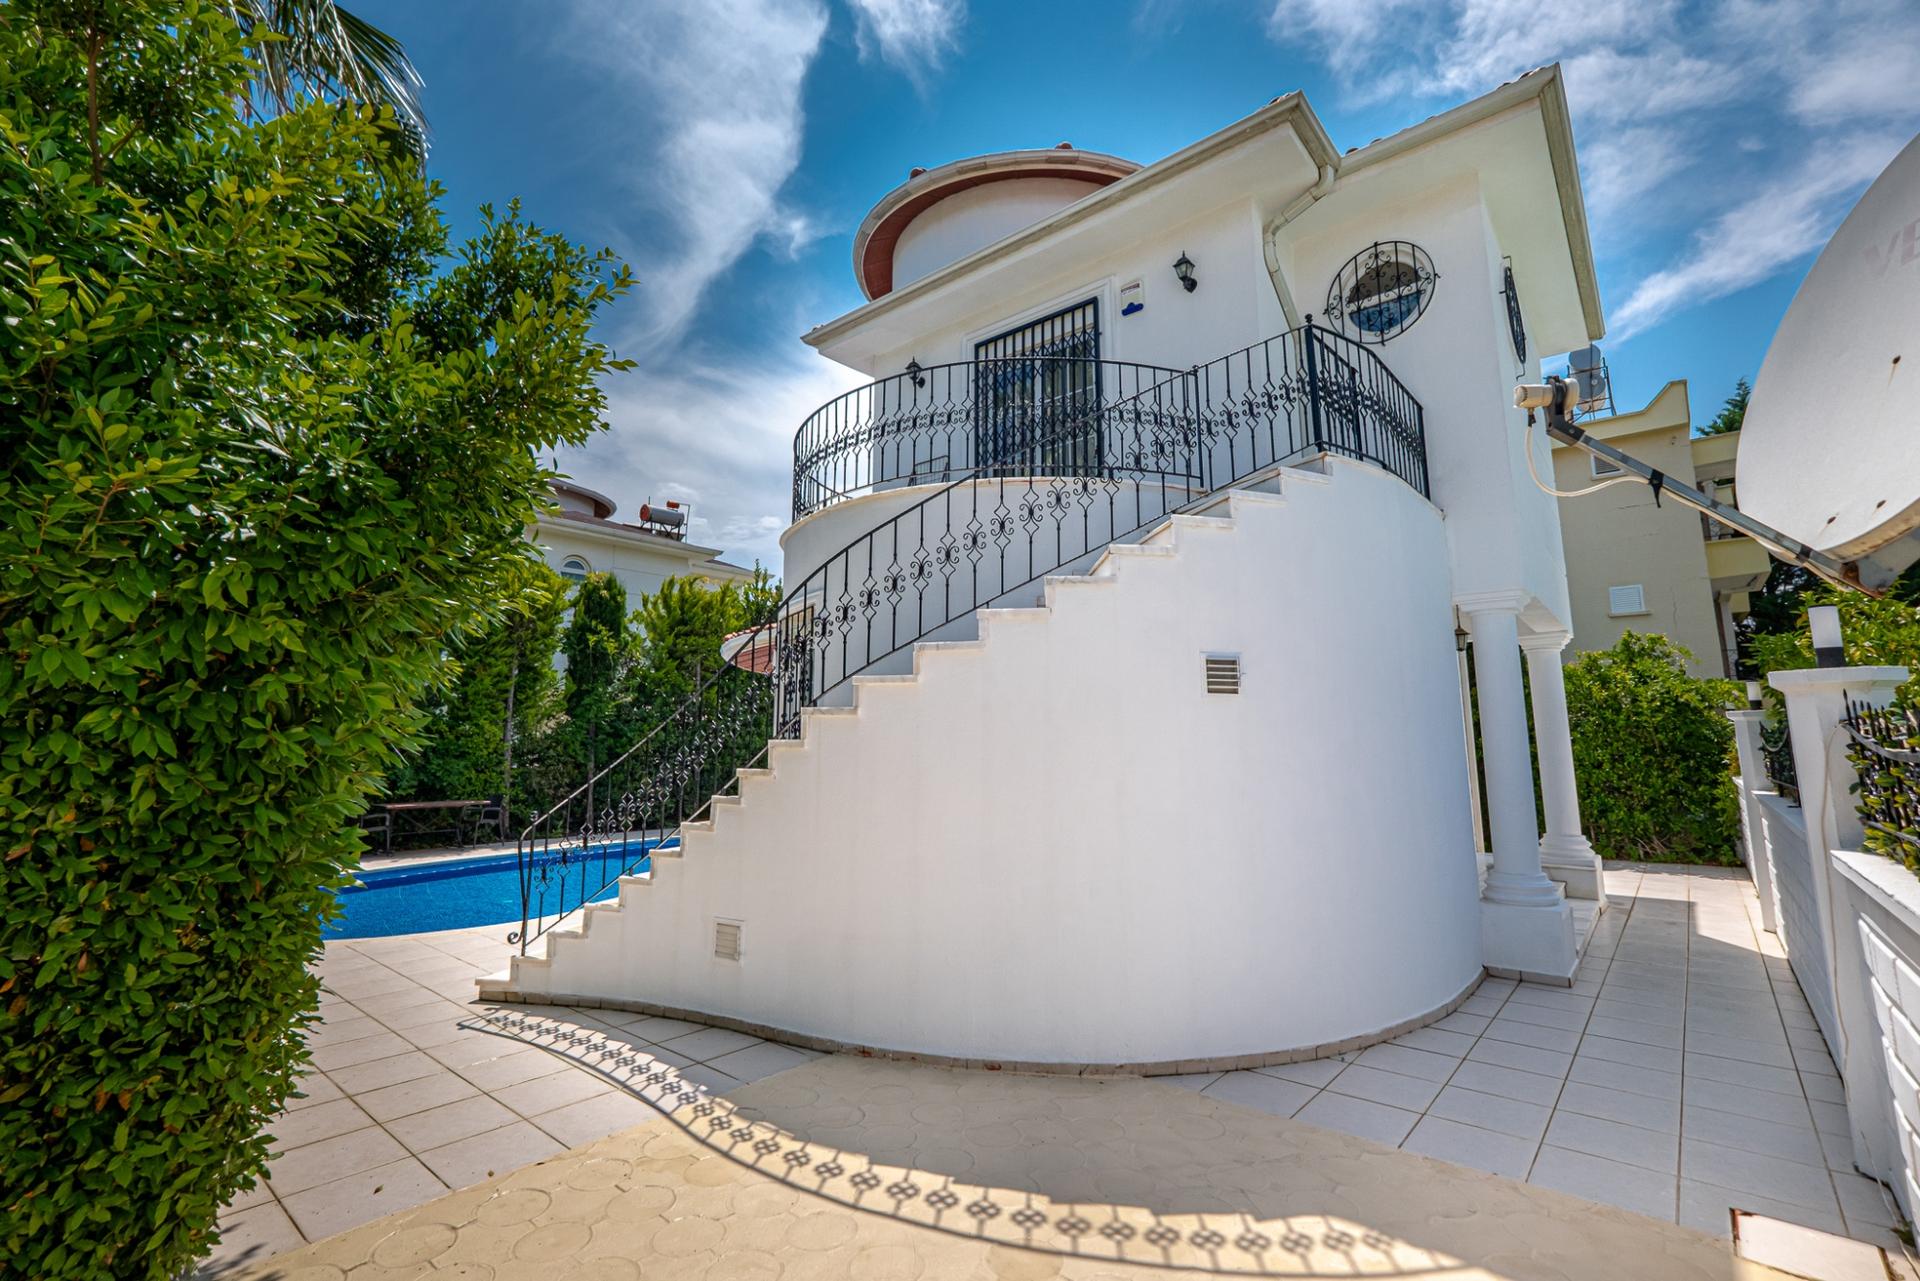 Our duplex villa is suitable for up to 5 guests with 2 bedrooms.